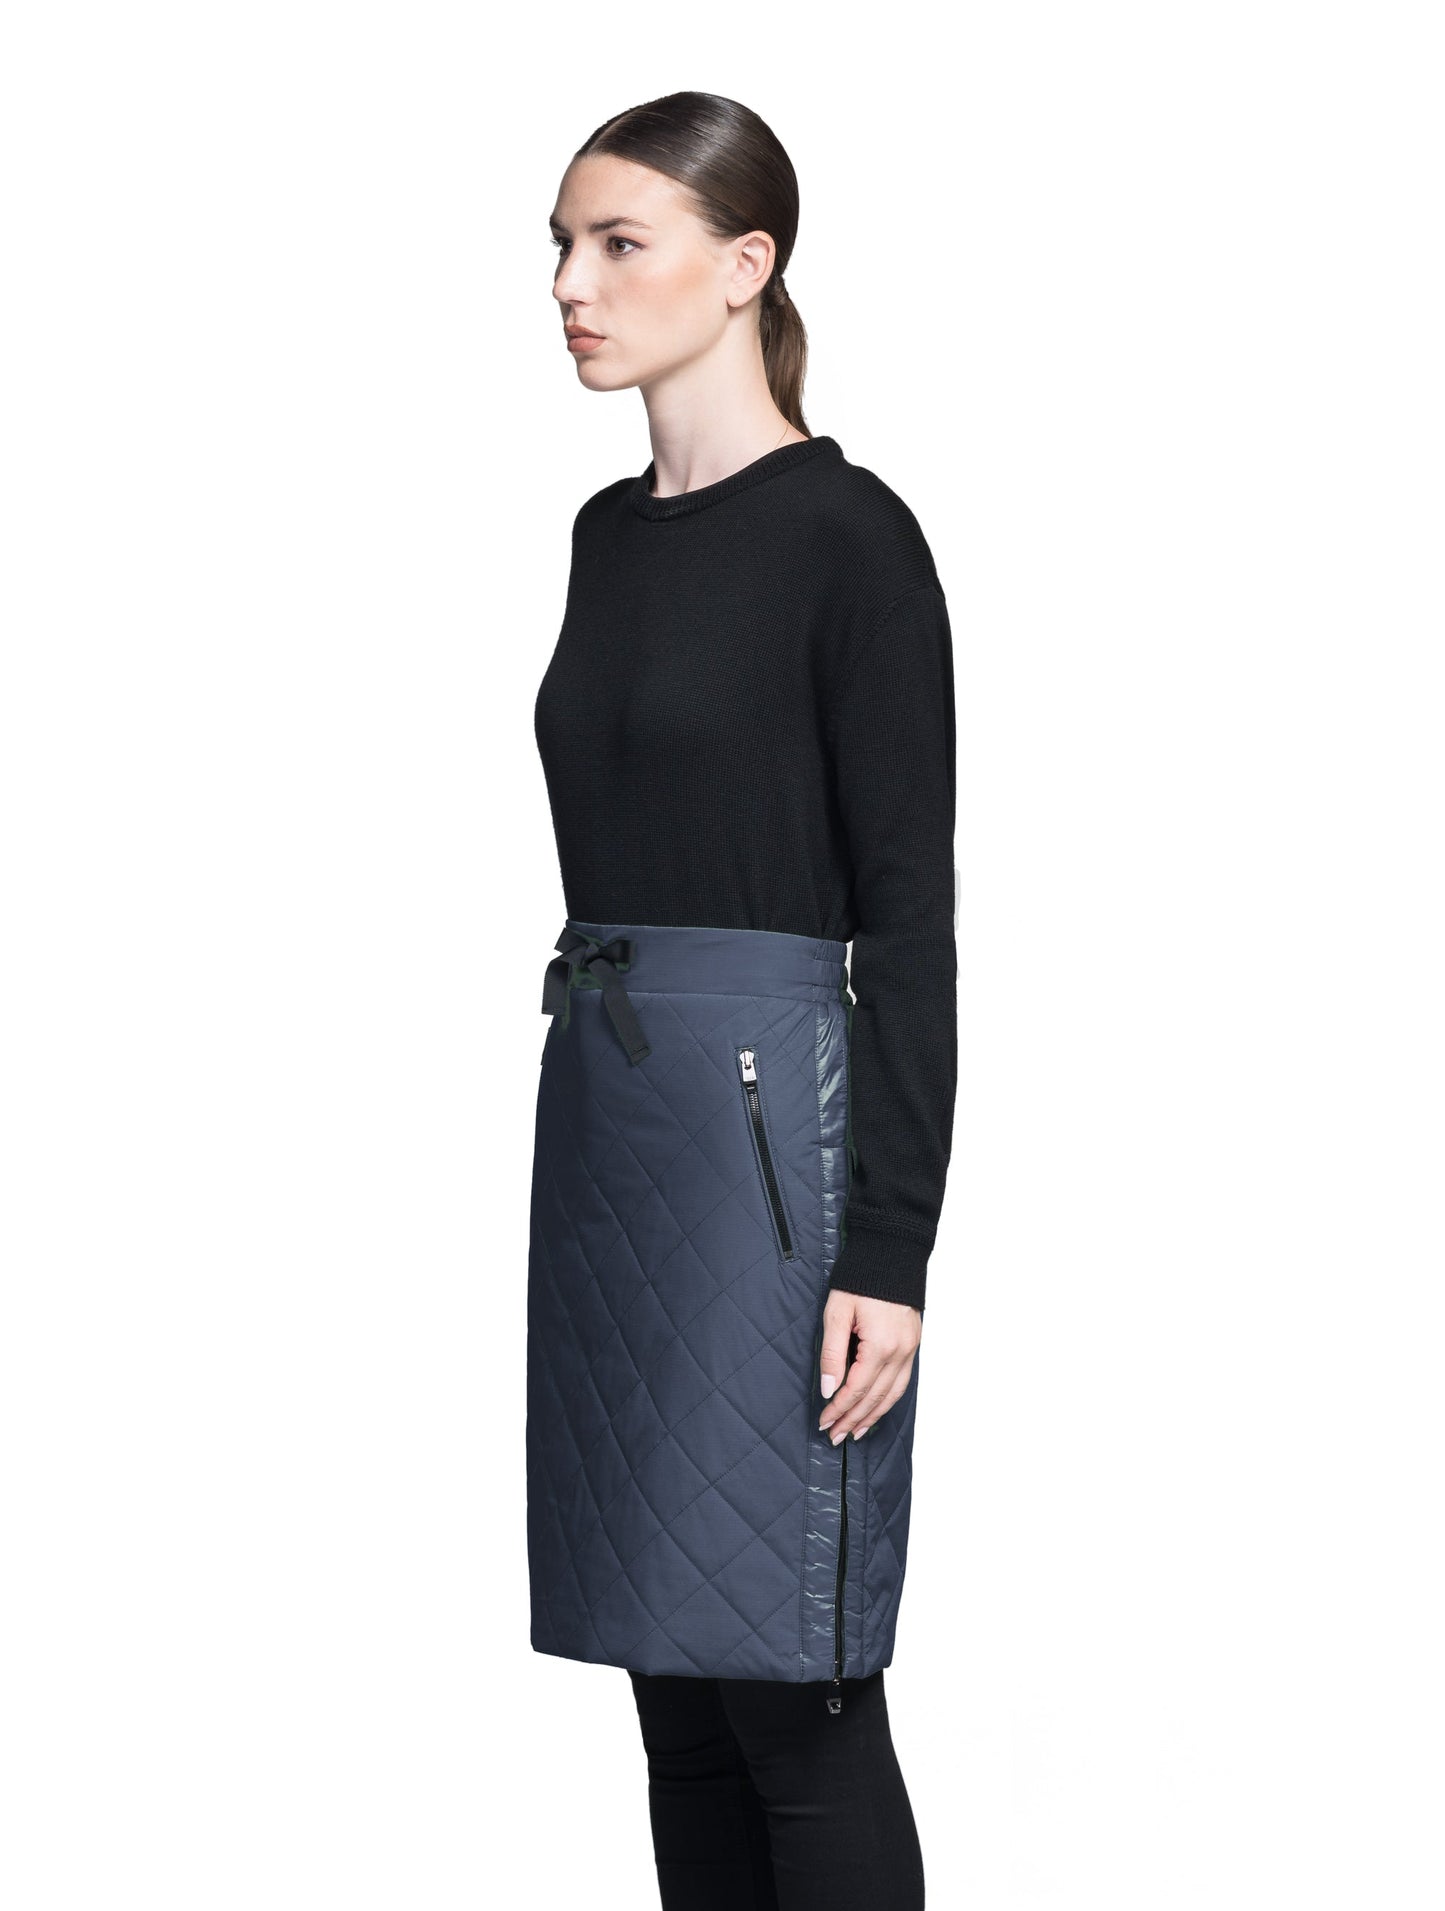 Phora Women's Tailored Skirt in knee length, premium stretch ripstop and contrast cire technical nylon taffeta fabrication, premium 4-way stretch, water resistant Primaloft Gold Insulation Active+, elasticated waistband with grosgrain ribbon drawstrings, two zipper pockets at waist, and zipper closure gusset at side seams, in Marine